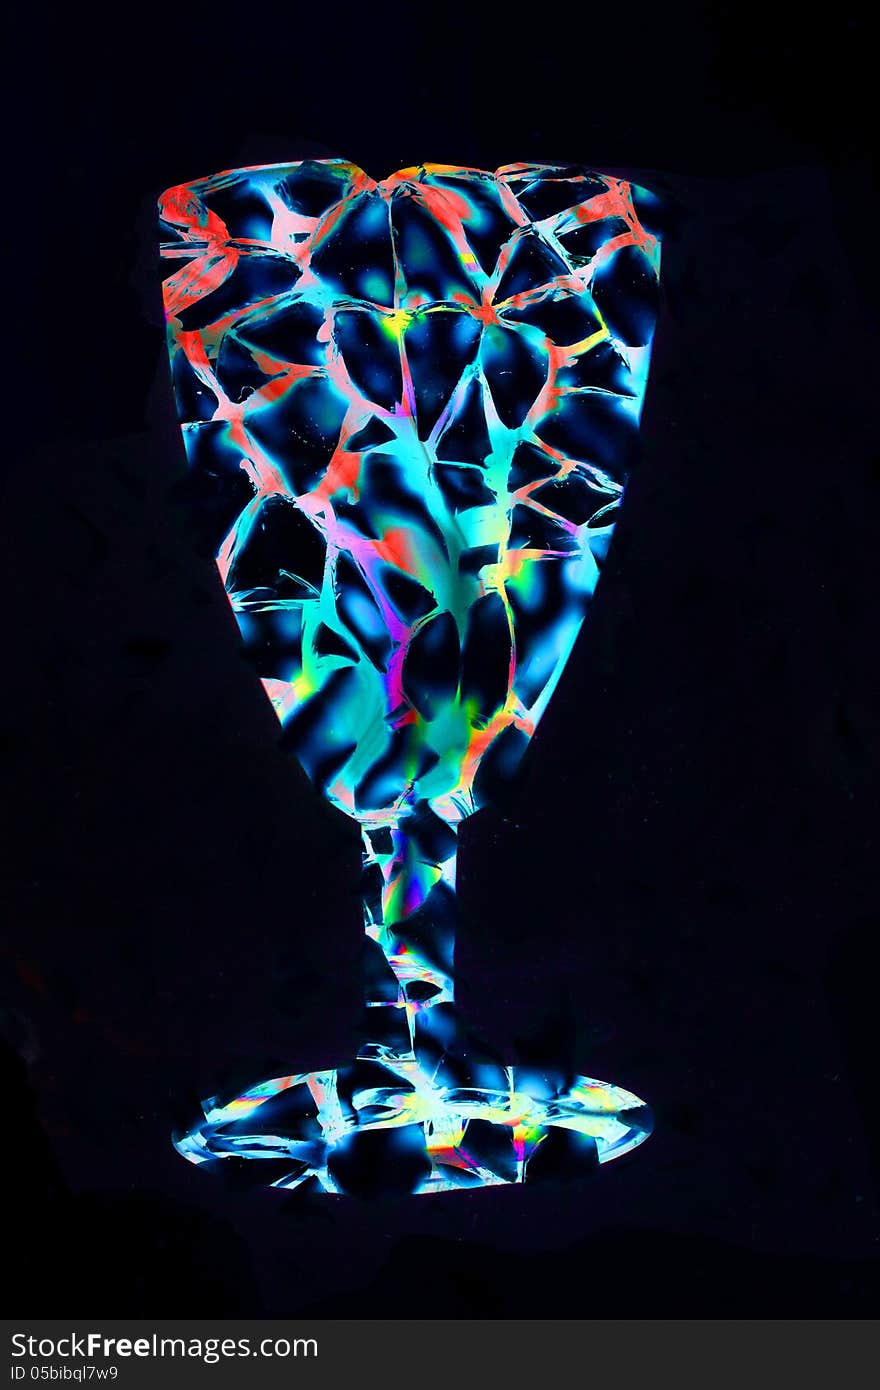 Composition of a party-beaker consisting of transparent plastic seen in polarized light with a bit of security-glass that has been damaged. Composition of a party-beaker consisting of transparent plastic seen in polarized light with a bit of security-glass that has been damaged